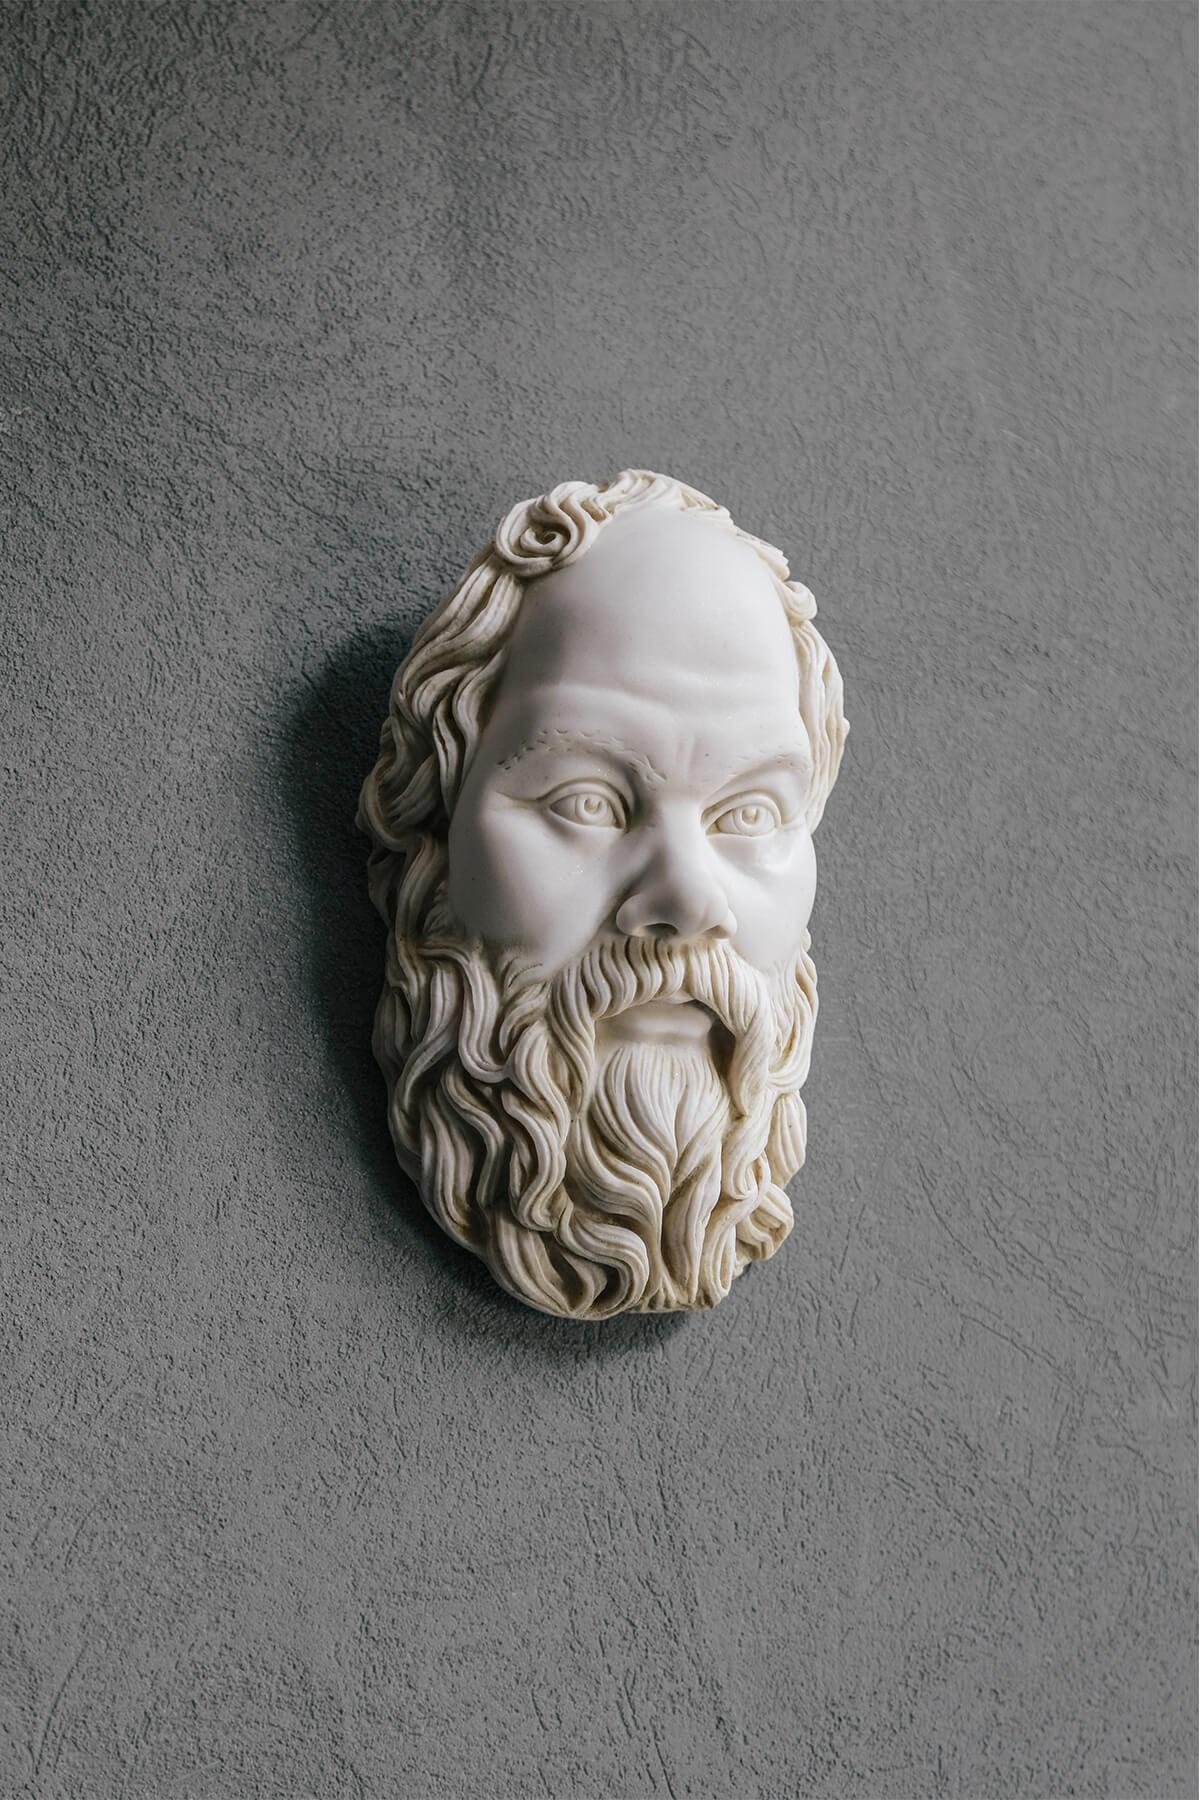 Turkish Socrates Mask Made with Compressed Marble Powder in stock For Sale